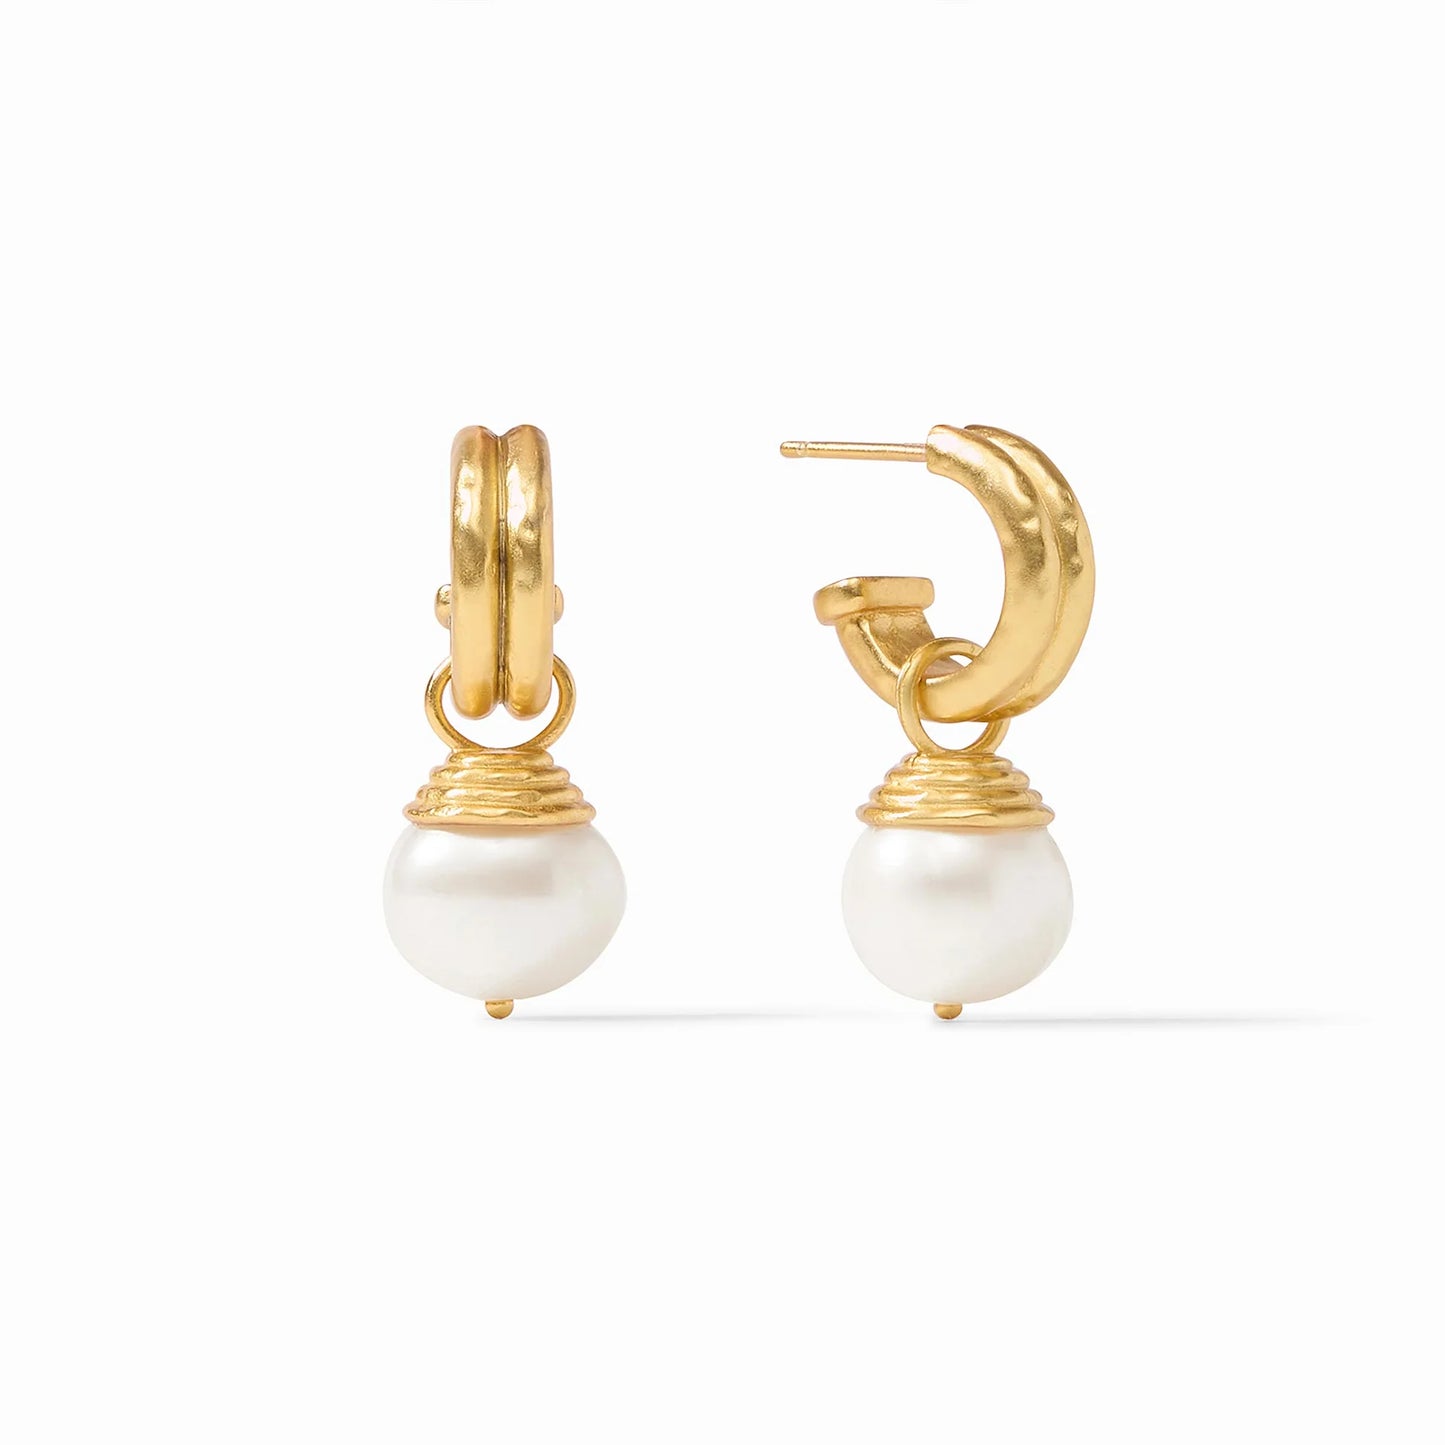 Astor Pearl Hoop & Charm Earring by Julie Vos features pumpkin-shaped freshwater pearl charm dangles from a lightly hammered huggie hoop.  24K gold plate, total length: 1.2 inches. Shop at The Painted Cottage an Annapolis boutique.